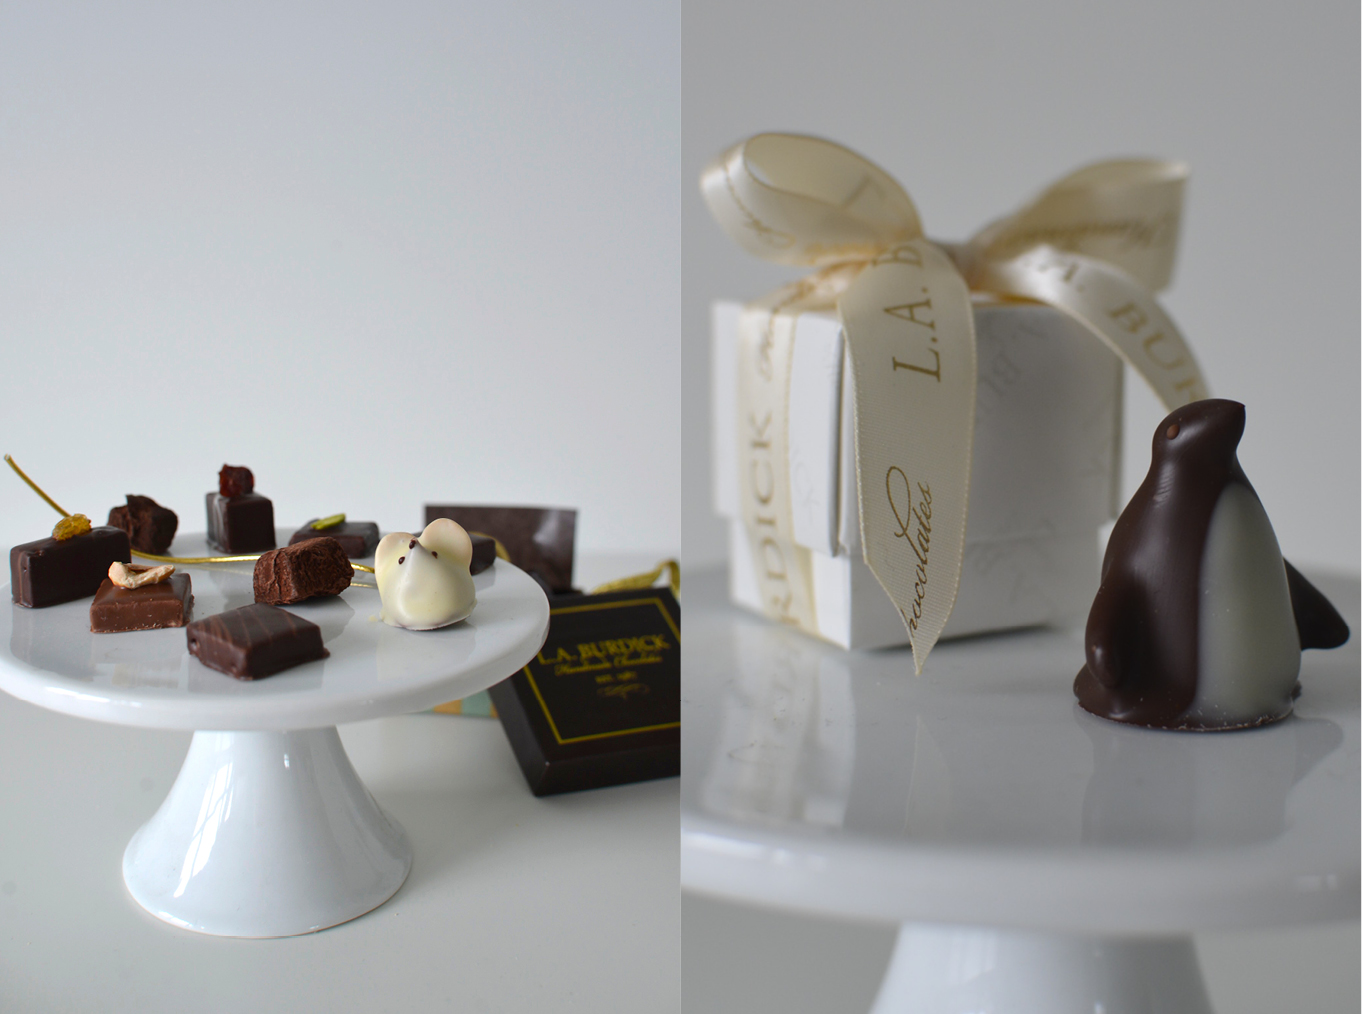 Handmade Chocolates in Adorable Shapes